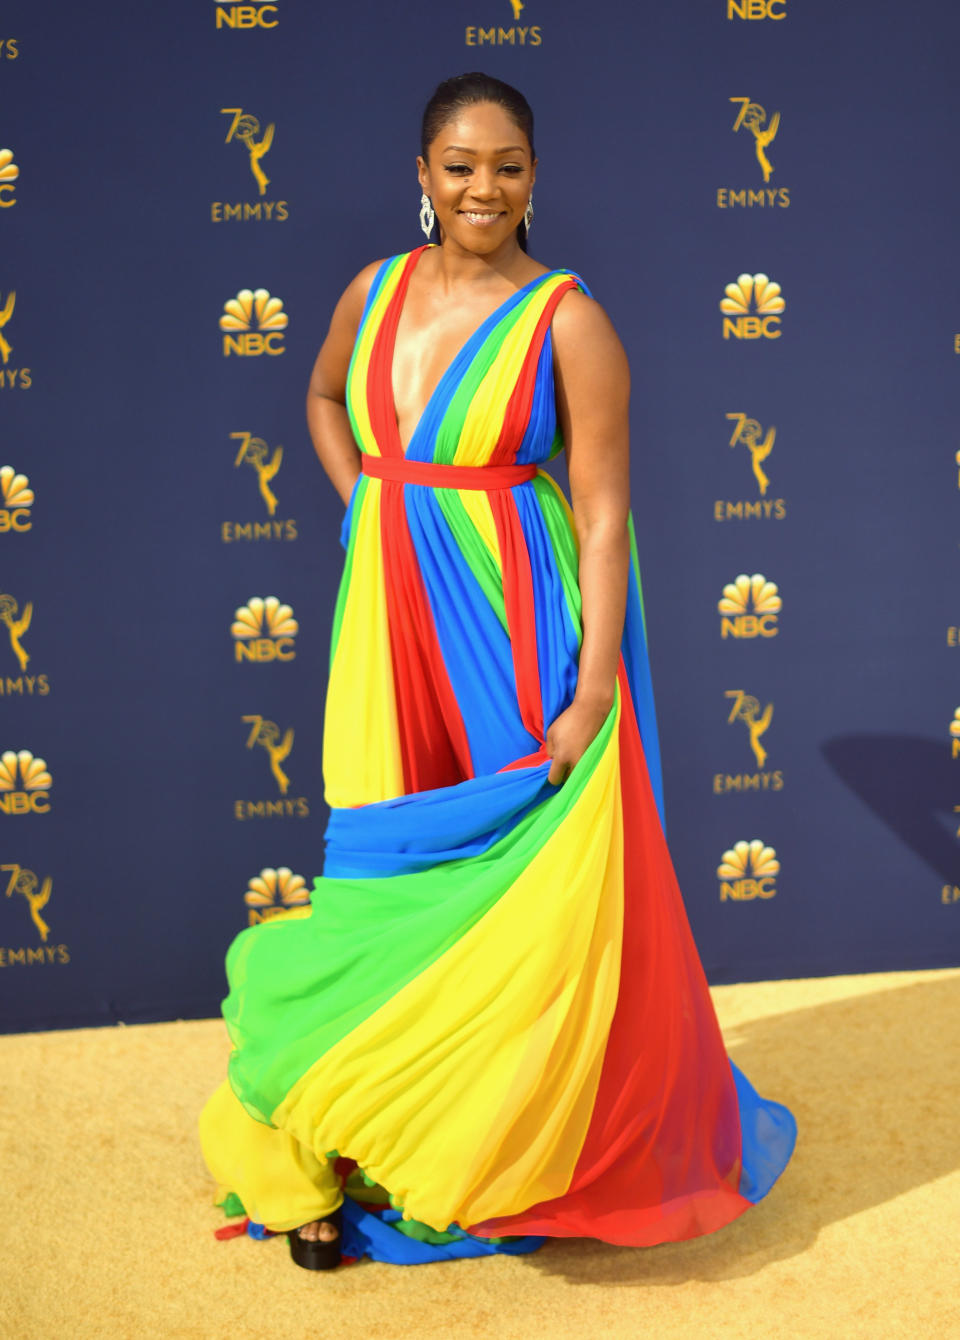 Haddish said the dress was inspired by the colors of the Eritrean flag. (Photo: Matt Winkelmeyer / Getty Images)